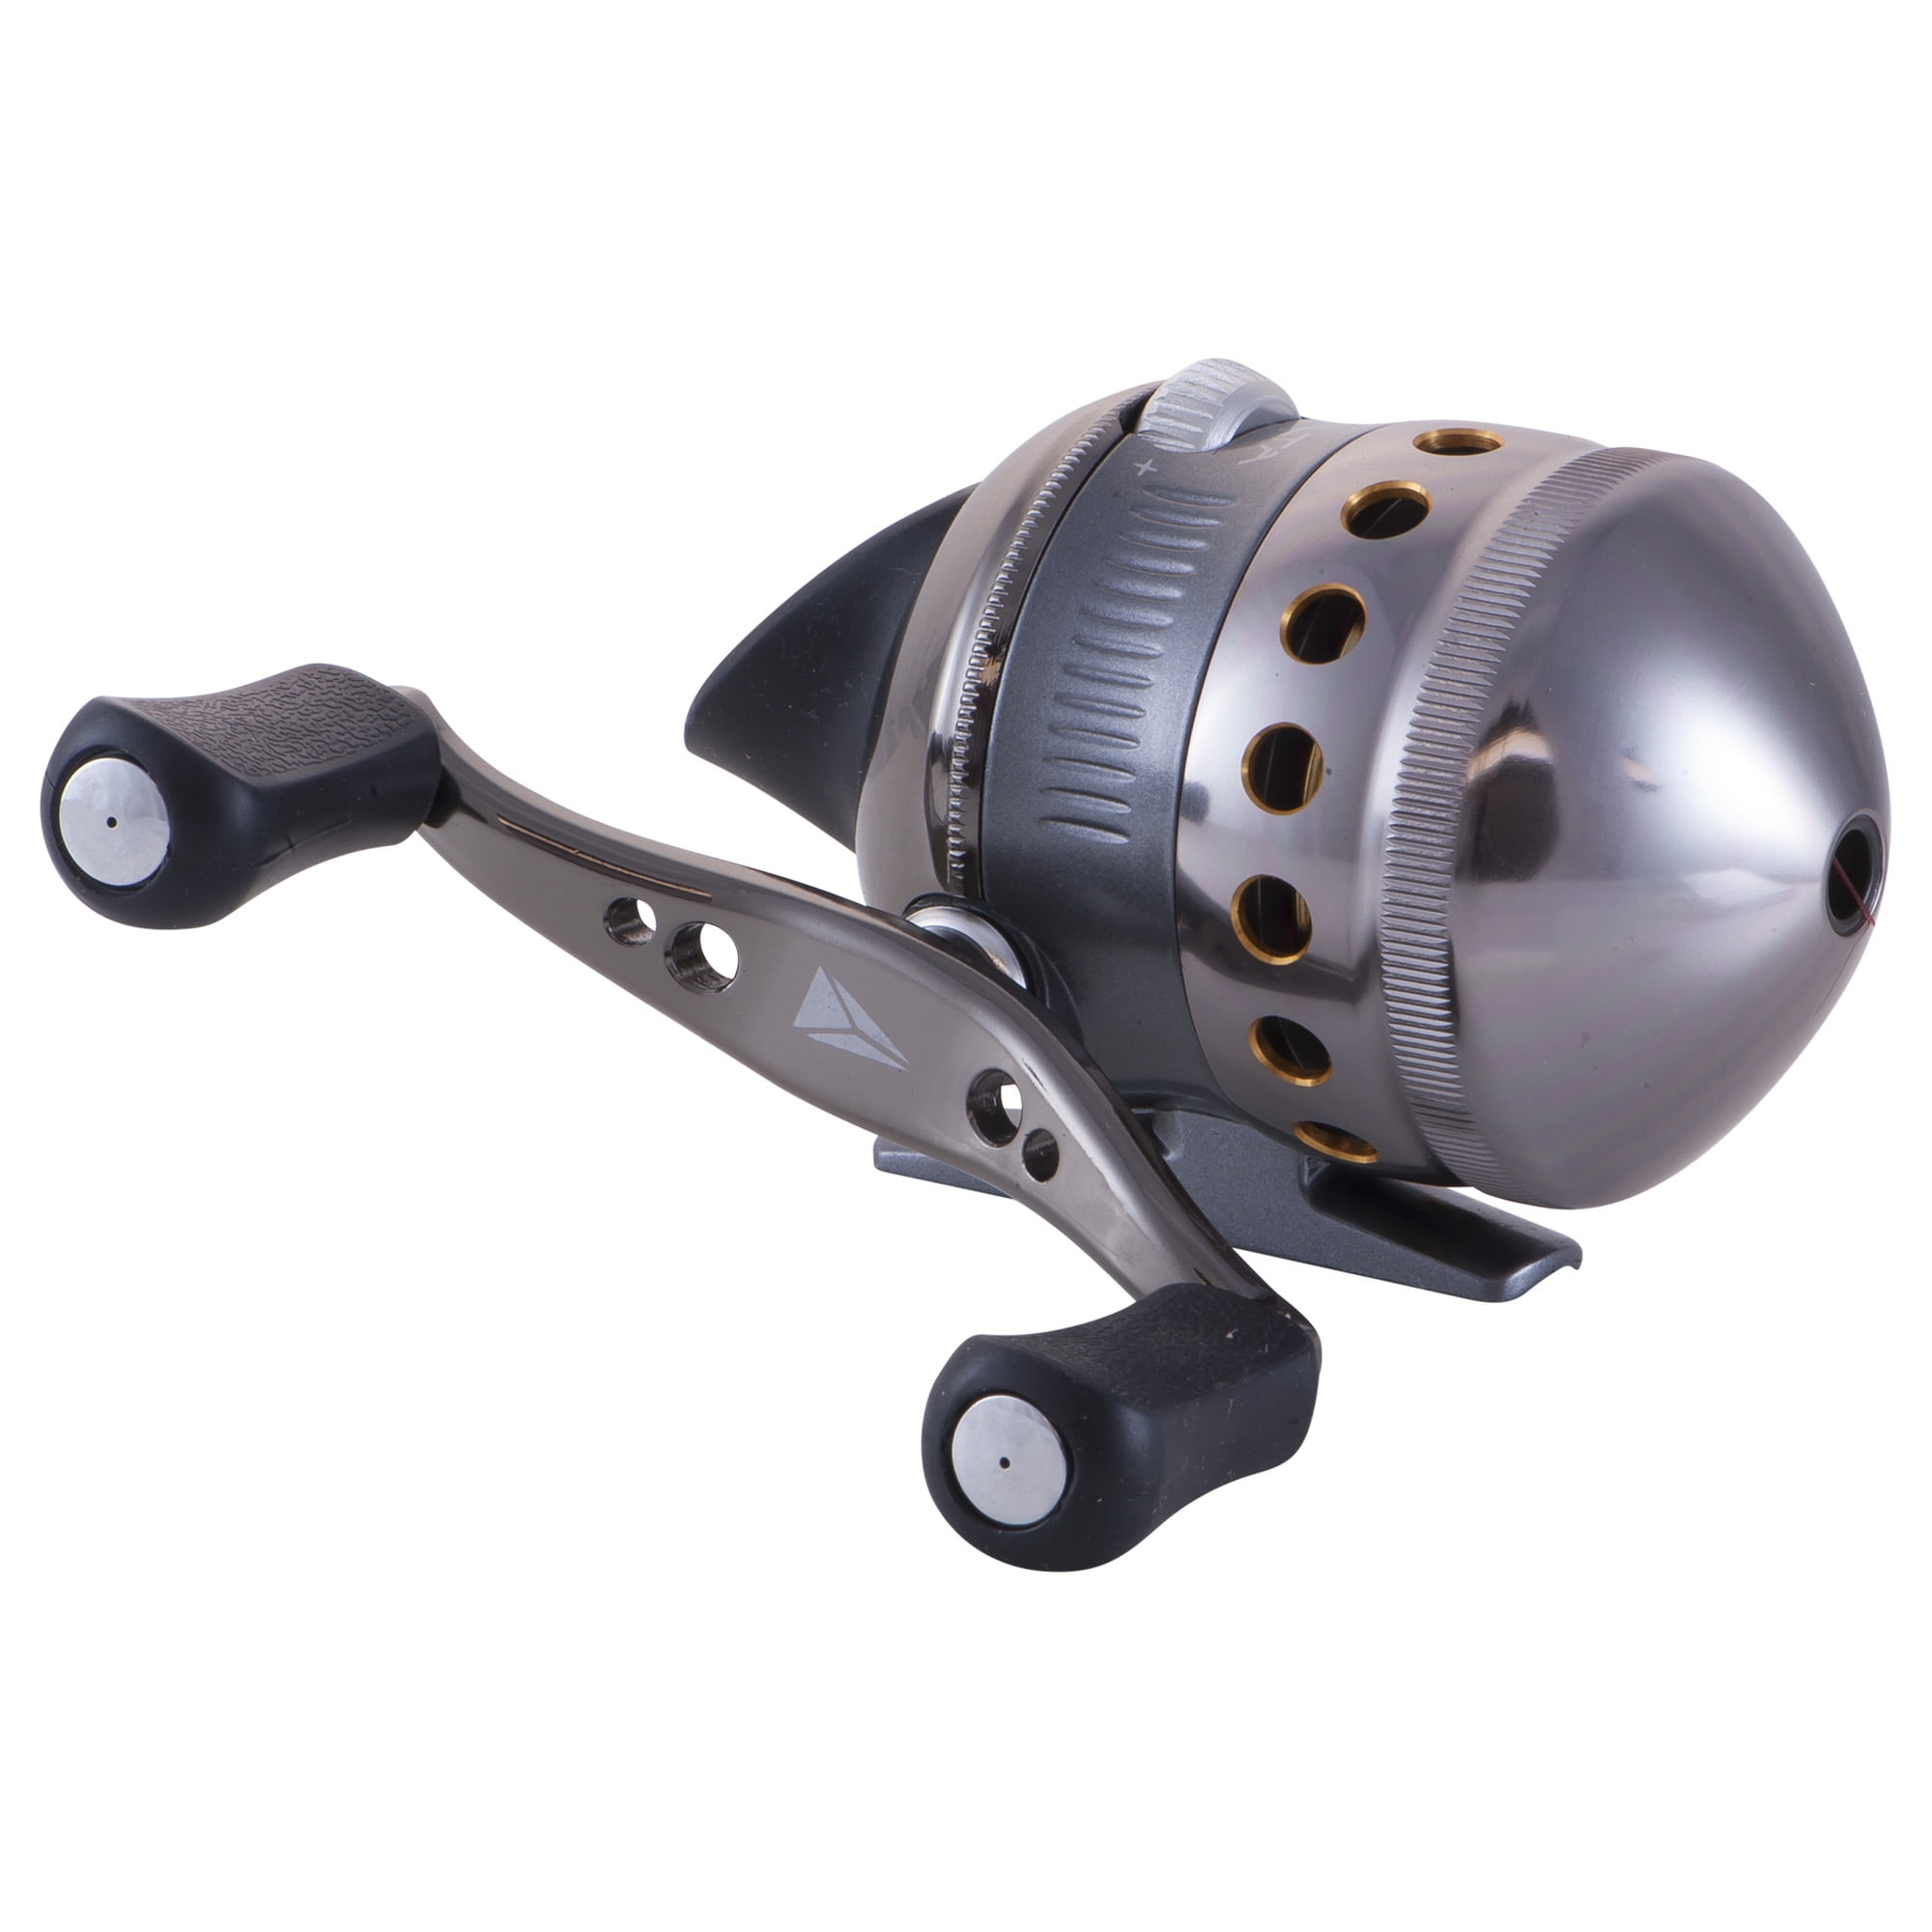 Zebco Regem FD 50 Finely Adjustable All Purpose Fishing Reel with 3  Bearings, Black/White